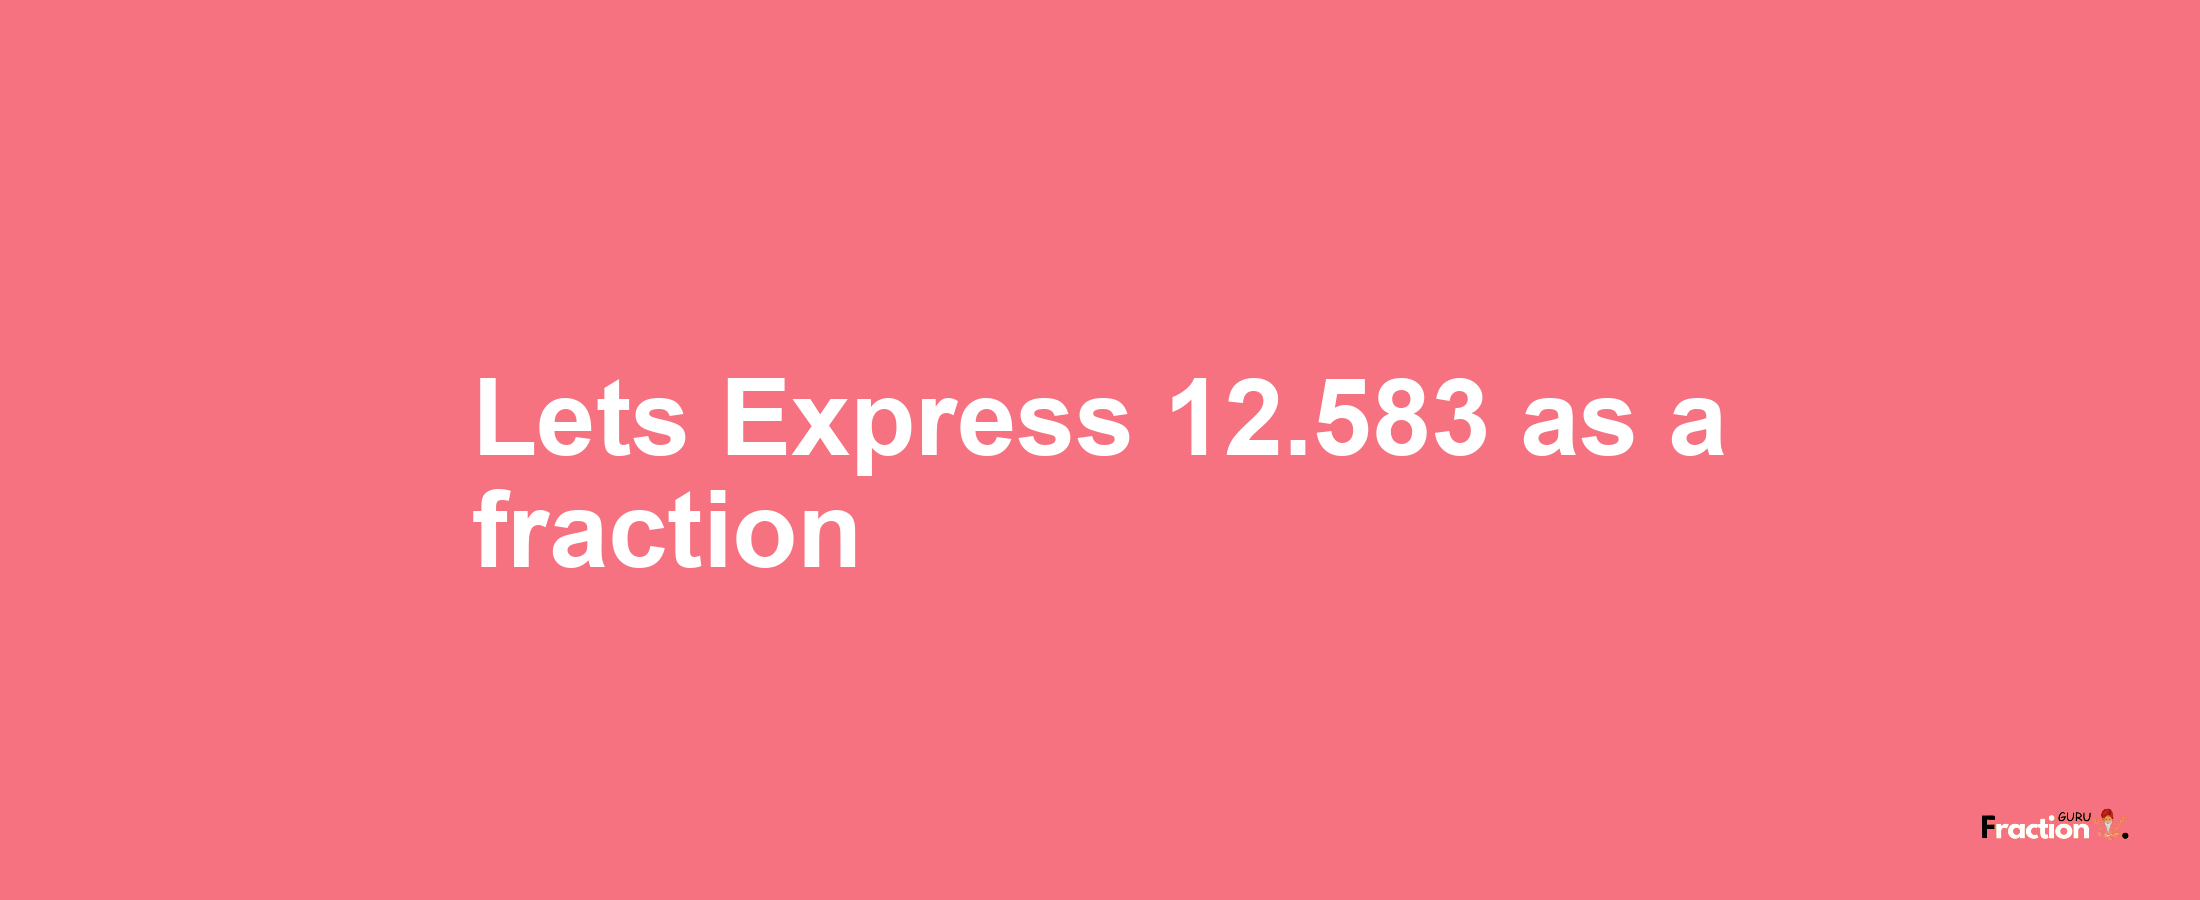 Lets Express 12.583 as afraction